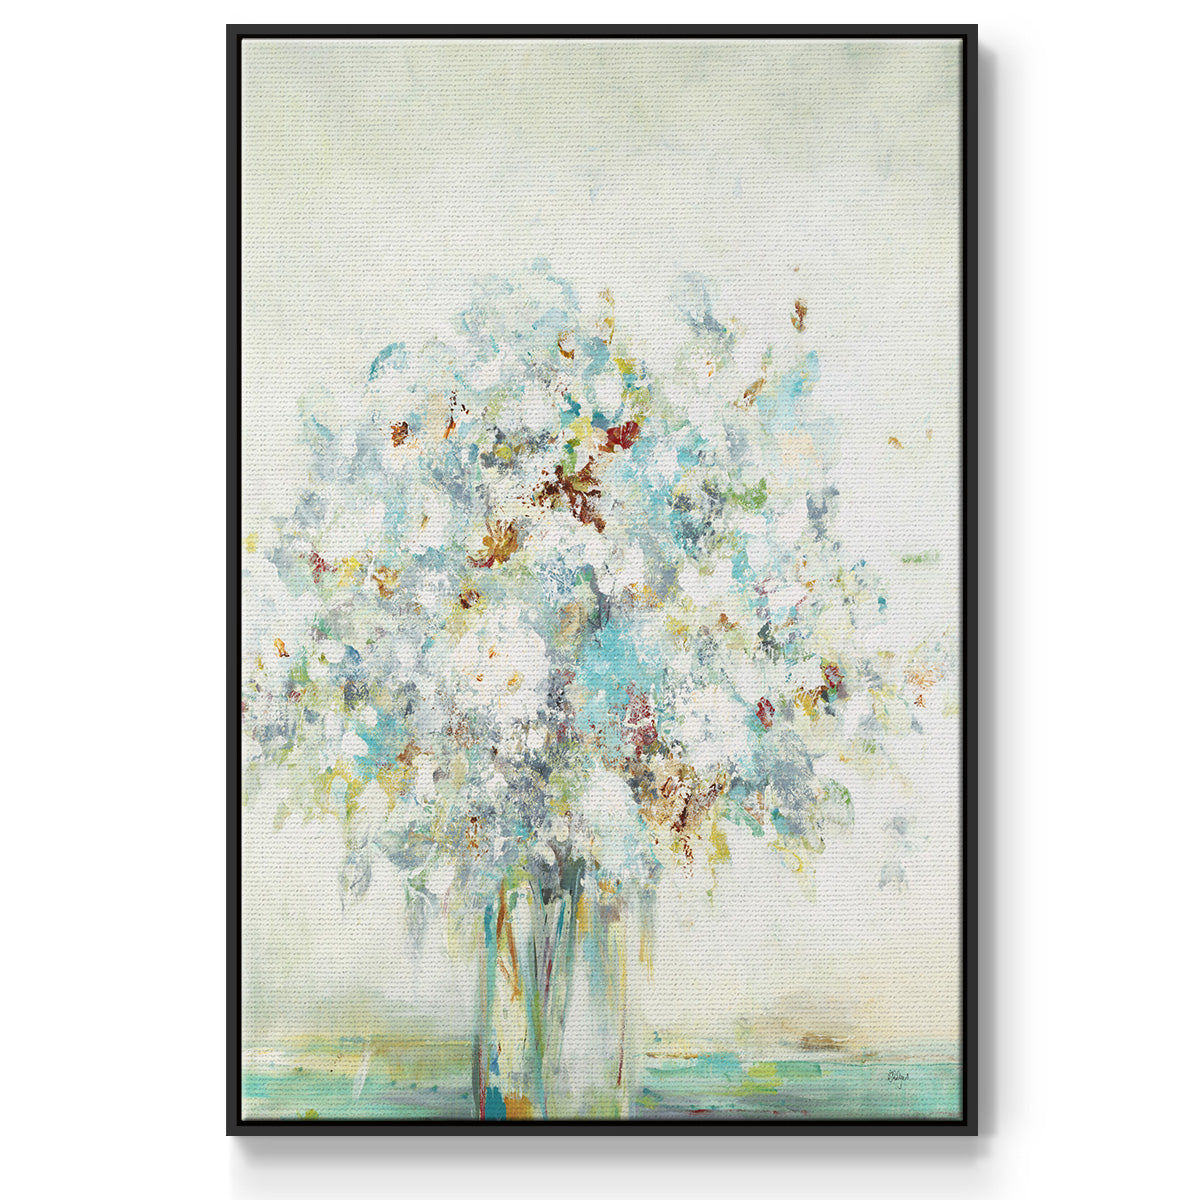 Textured Bouquet - Framed Premium Gallery Wrapped Canvas L Frame - Ready to Hang